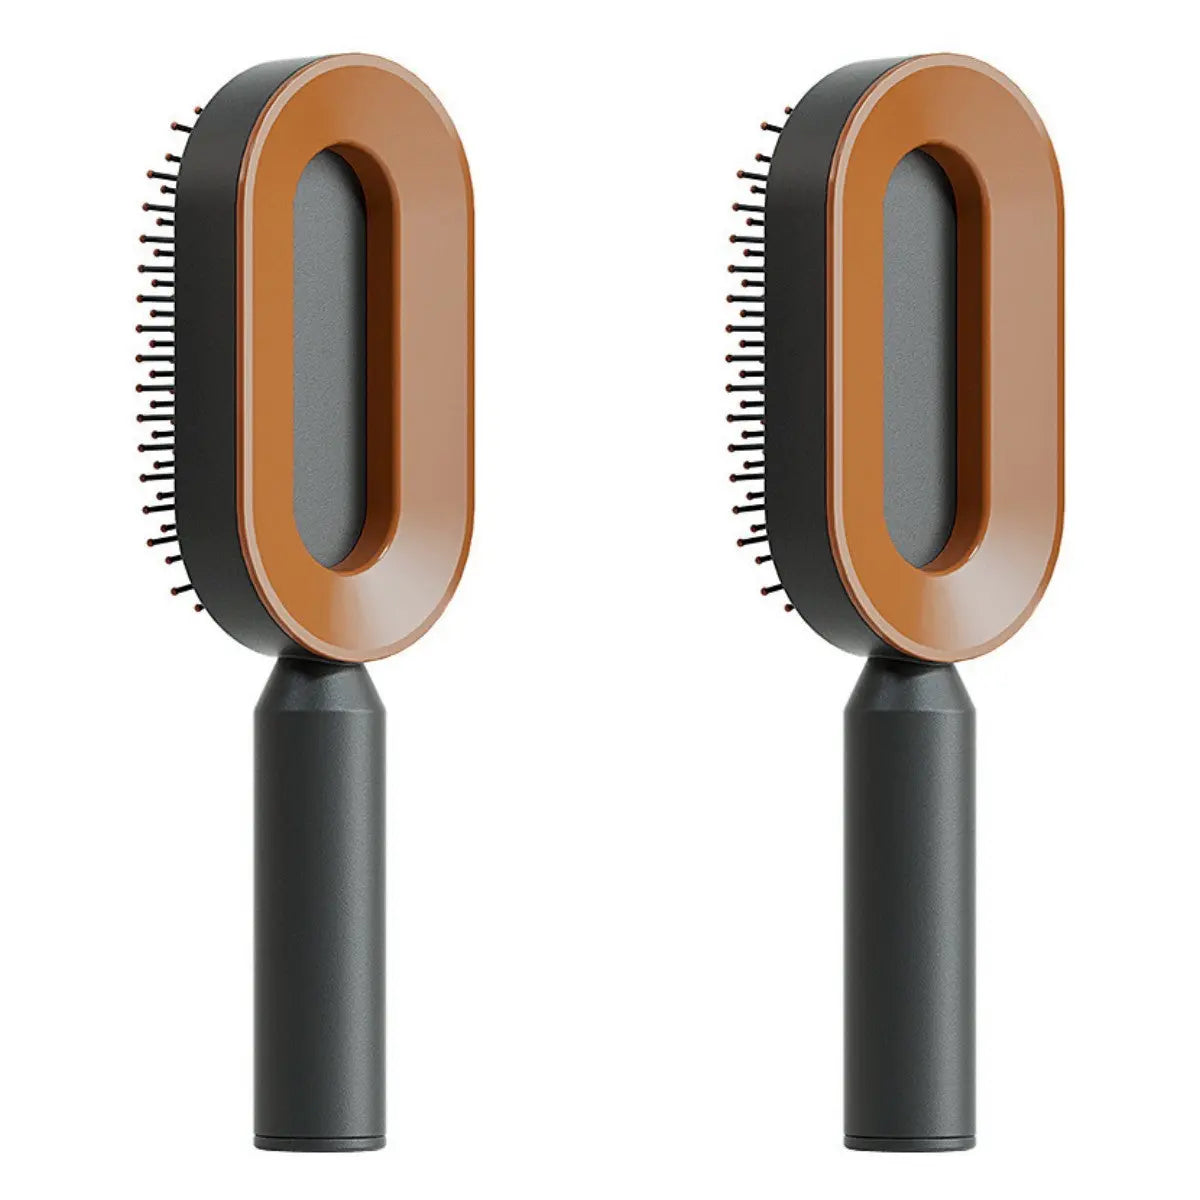 Self Cleaning Hair Brush For Women One-key Cleaning Hair Loss Airbag Massage Scalp Comb Anti-Static Hairbrush - Trending's Arena Beauty Self Cleaning Hair Brush For Women One-key Cleaning Hair Loss Airbag Massage Scalp Comb Anti-Static Hairbrush FACE Set-J